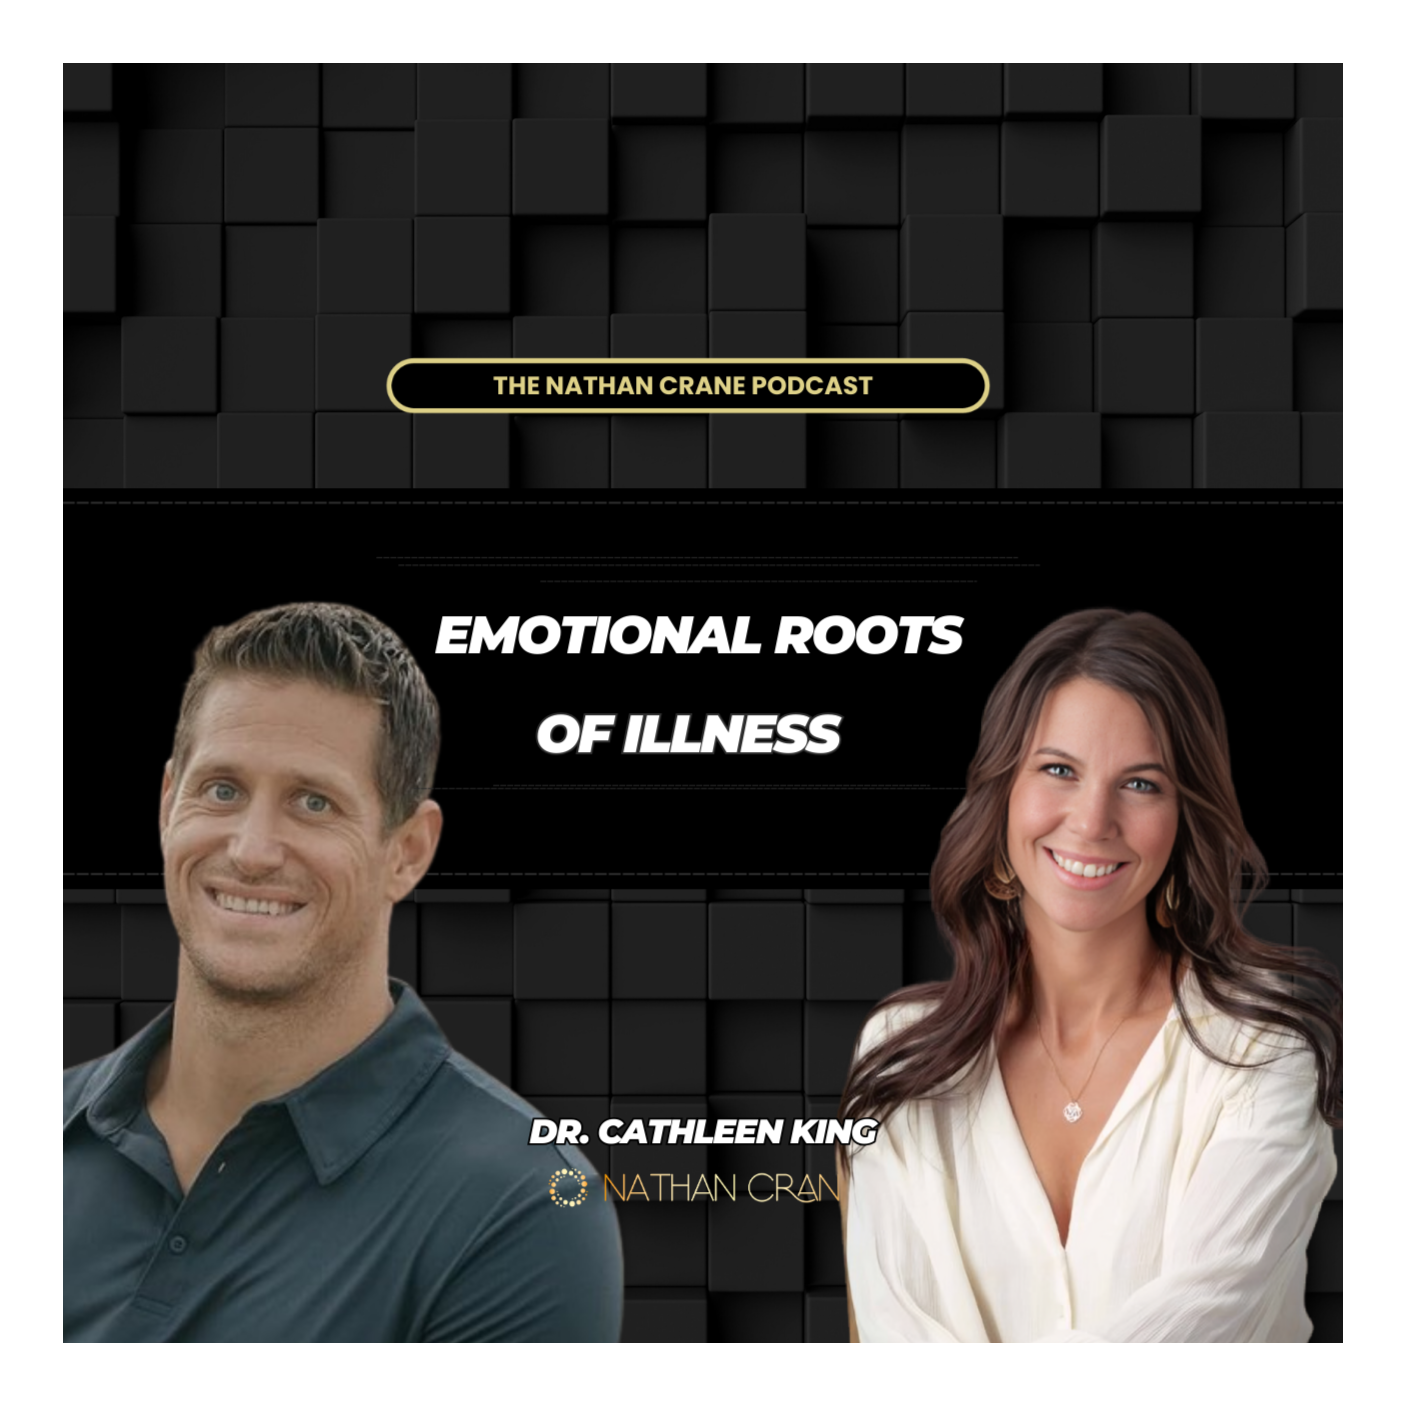 Dr. Cathleen King: Emotional Roots of Illness | Nathan Crane Podcast